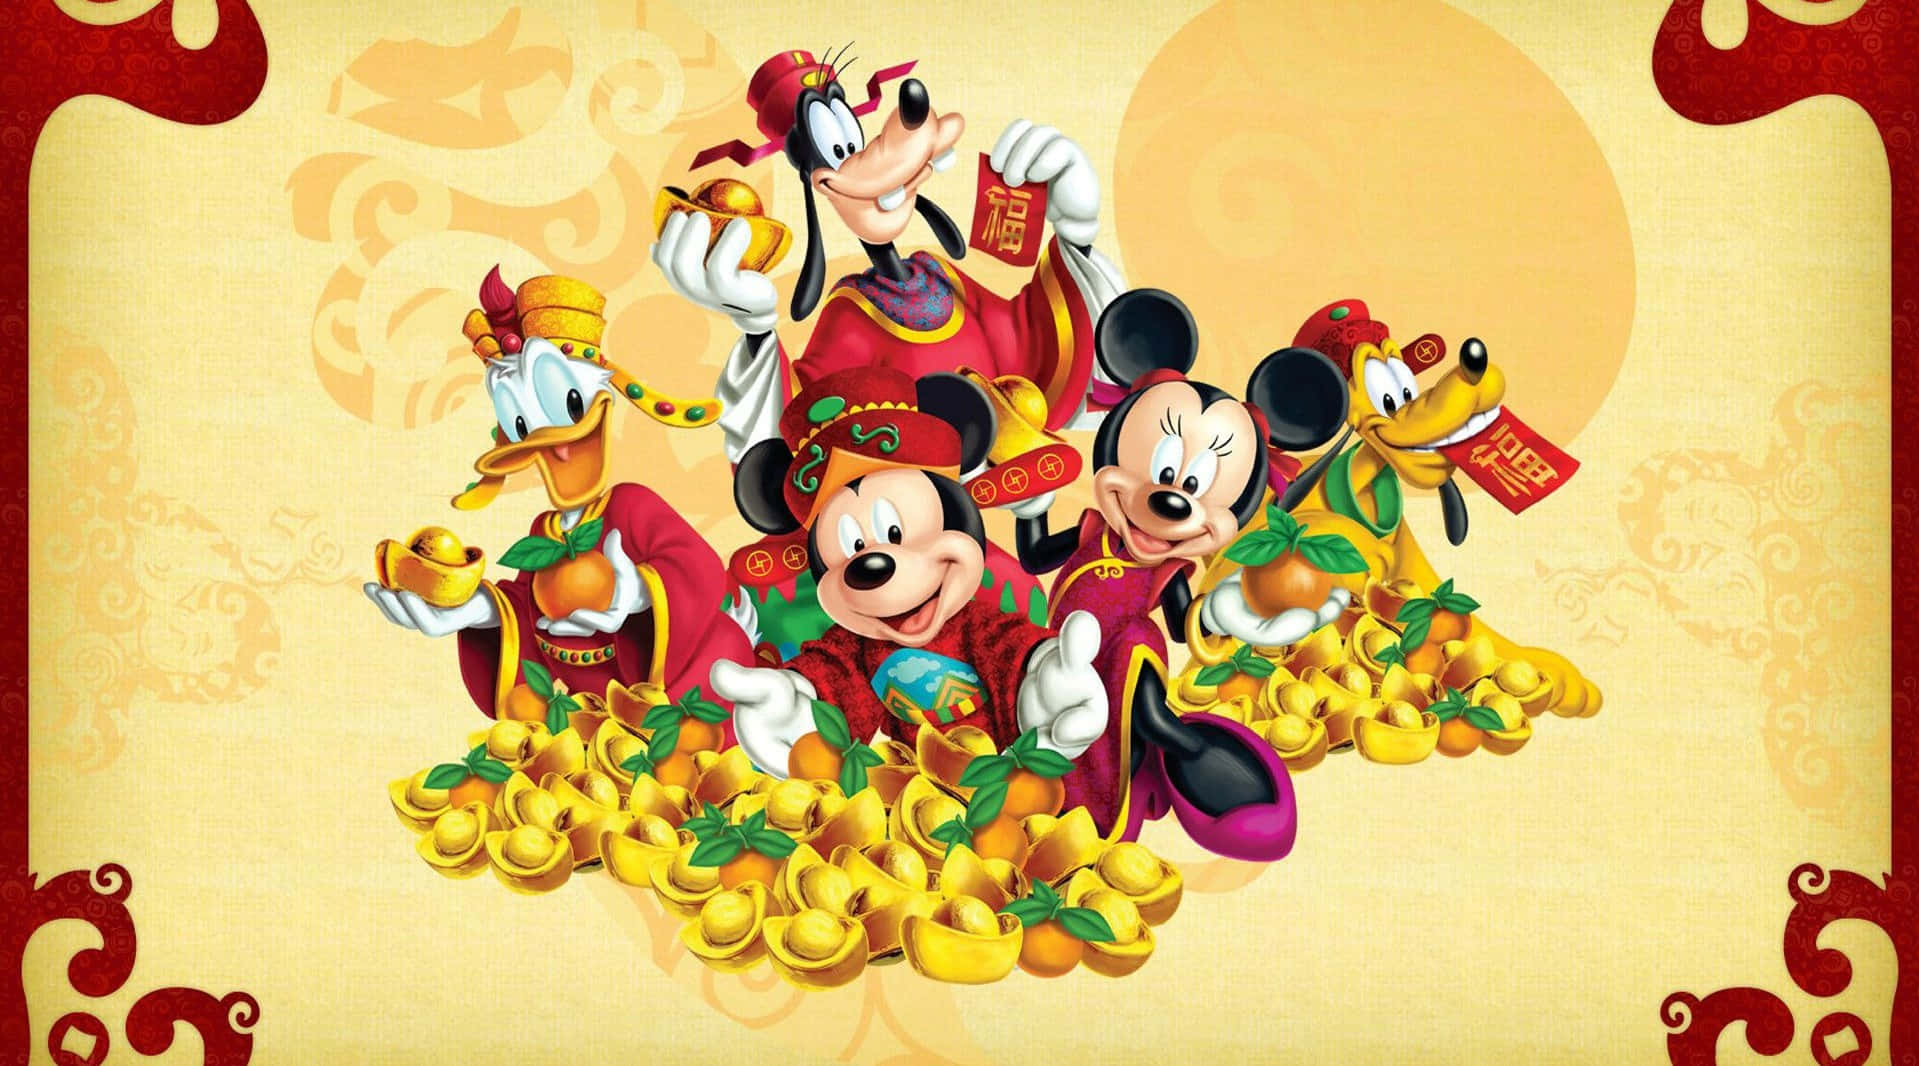 Celebrate the New Year Disney-style! Wallpaper